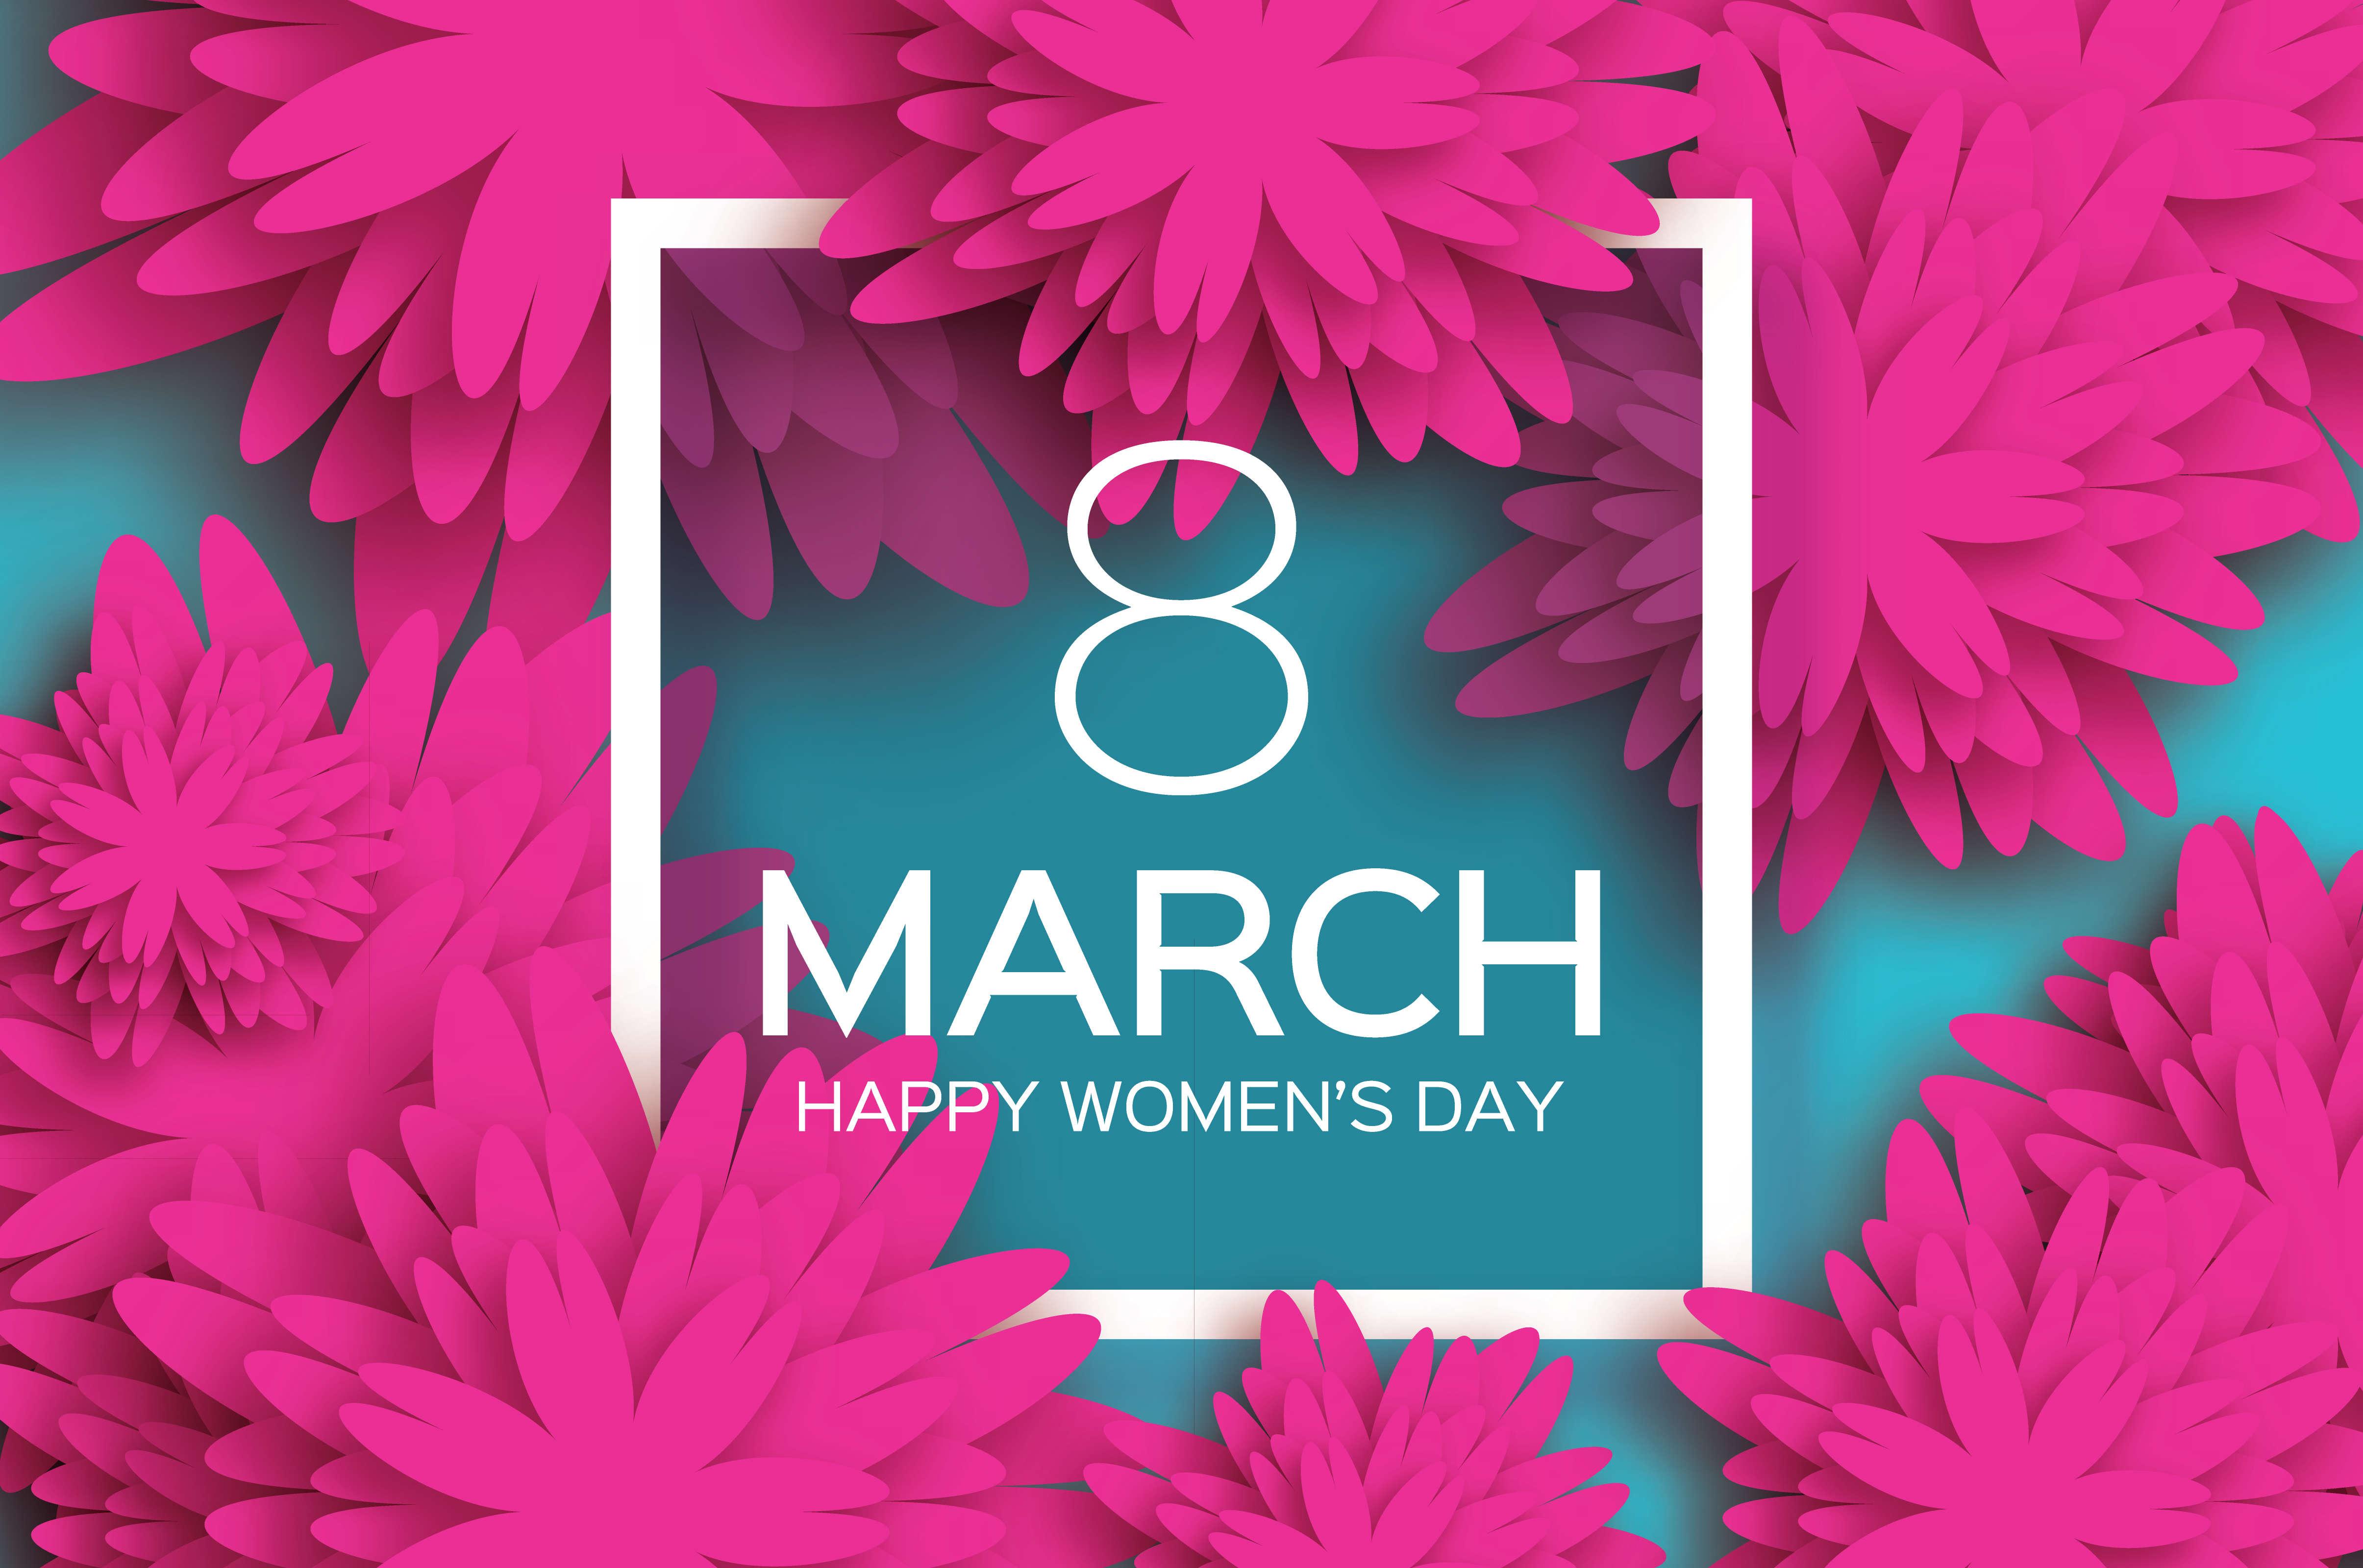 Happy Women's Day 2020: Image, Messages, Greetings, Wishes